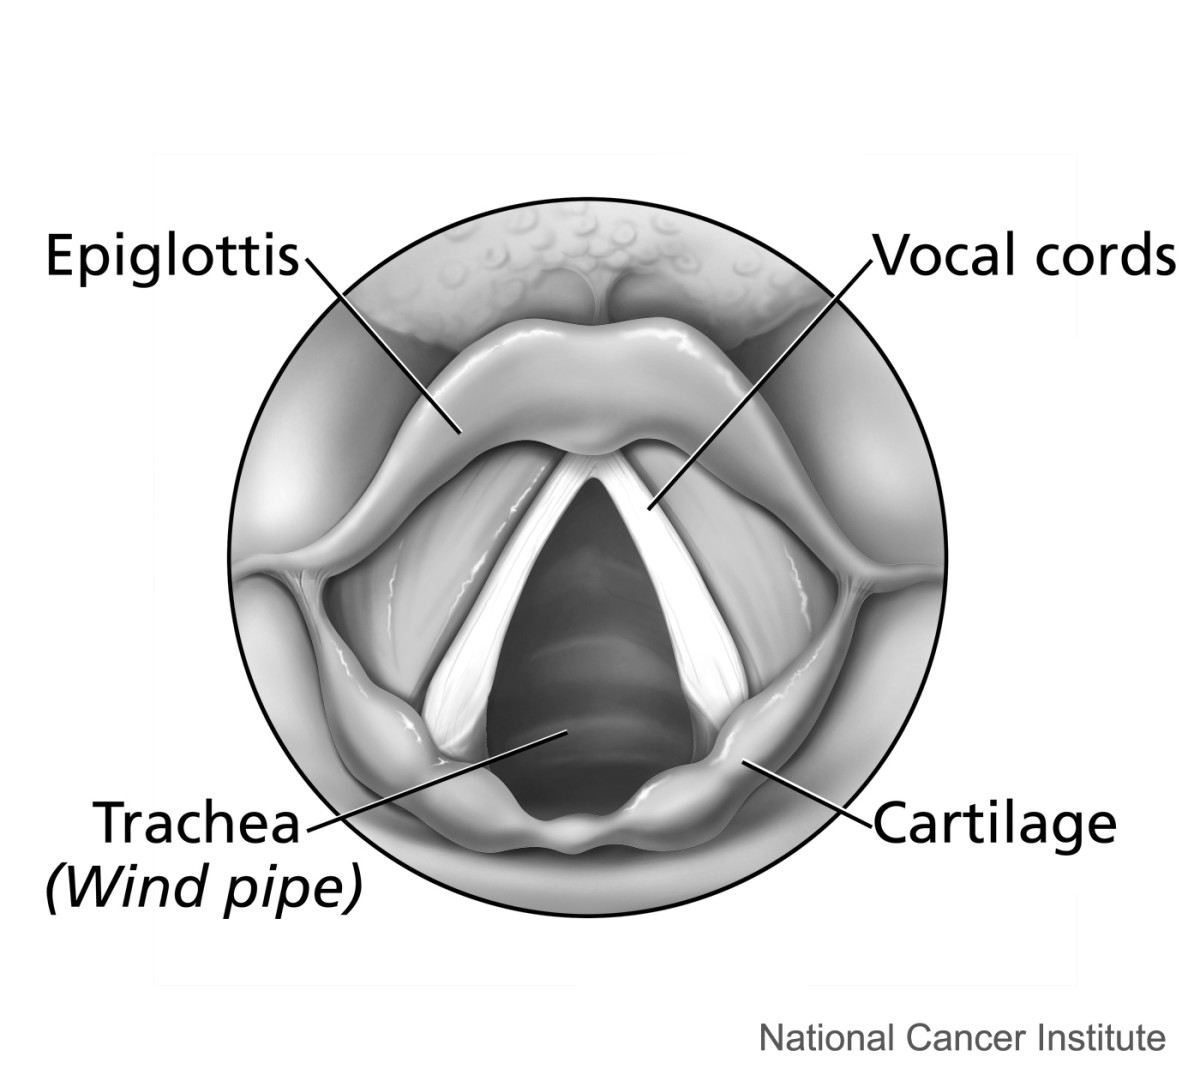 The larynx and vocal cords